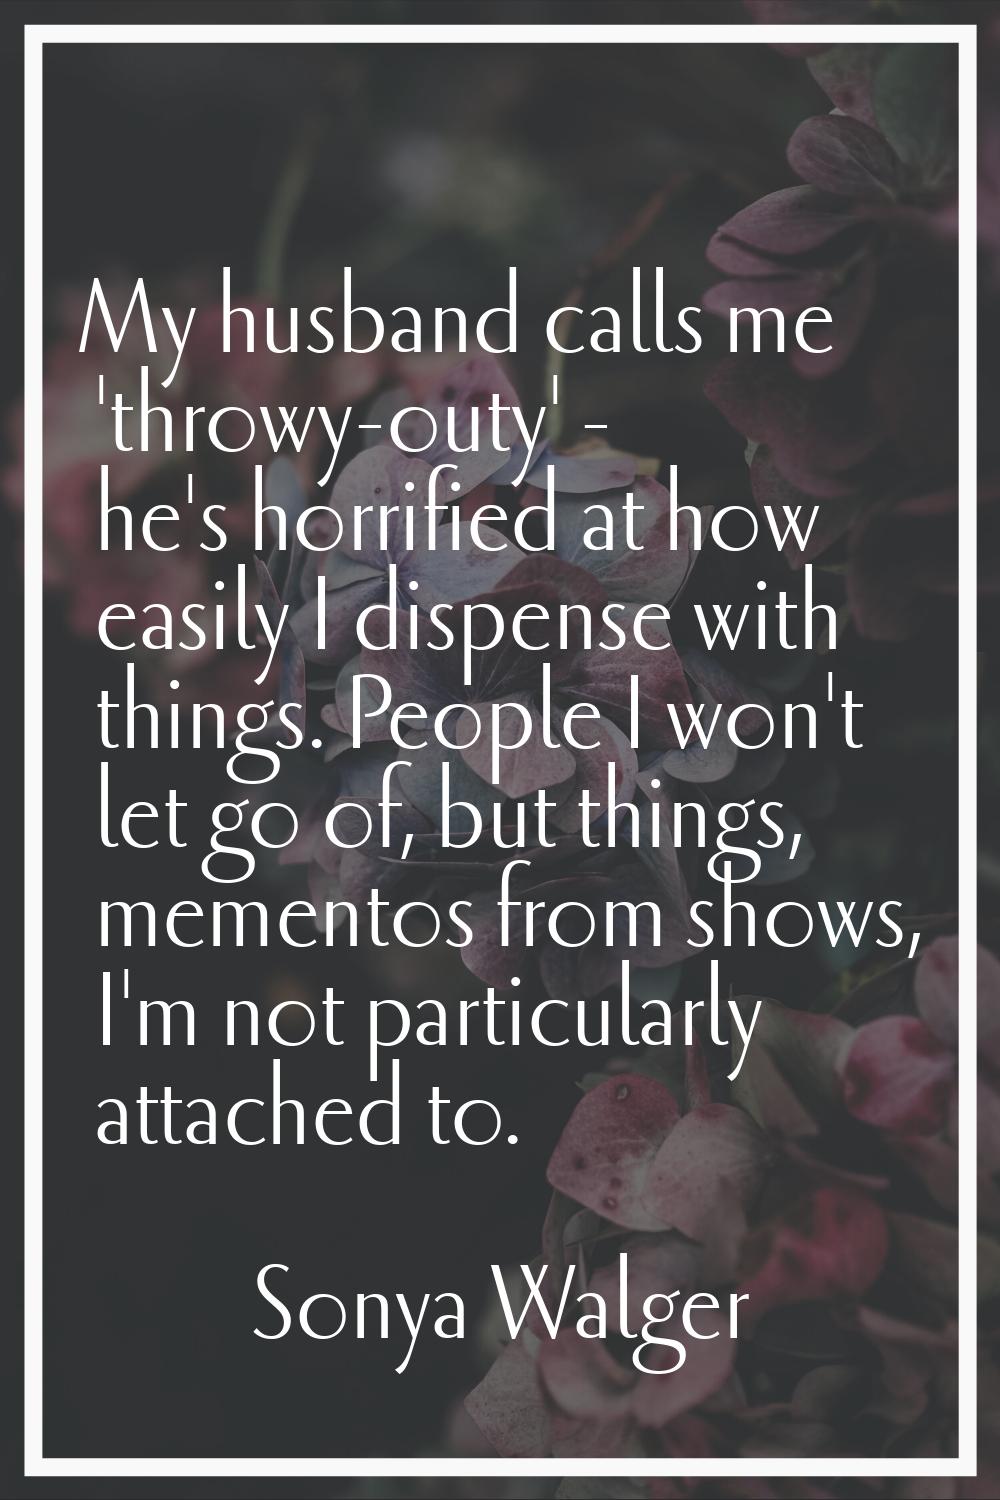 My husband calls me 'throwy-outy' - he's horrified at how easily I dispense with things. People I w